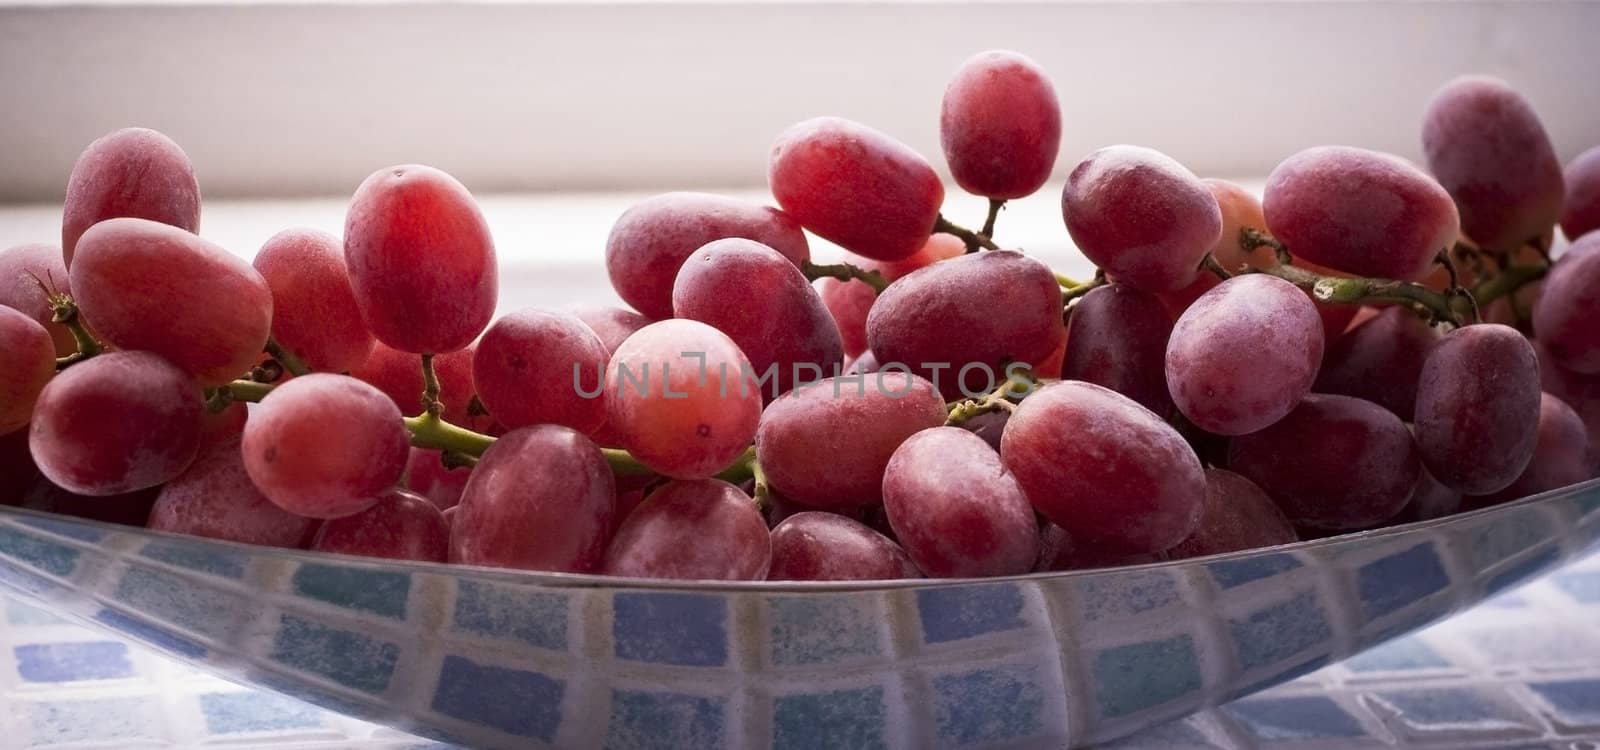 organic red grapes on a silver dish







organic red grapes on a silver dish